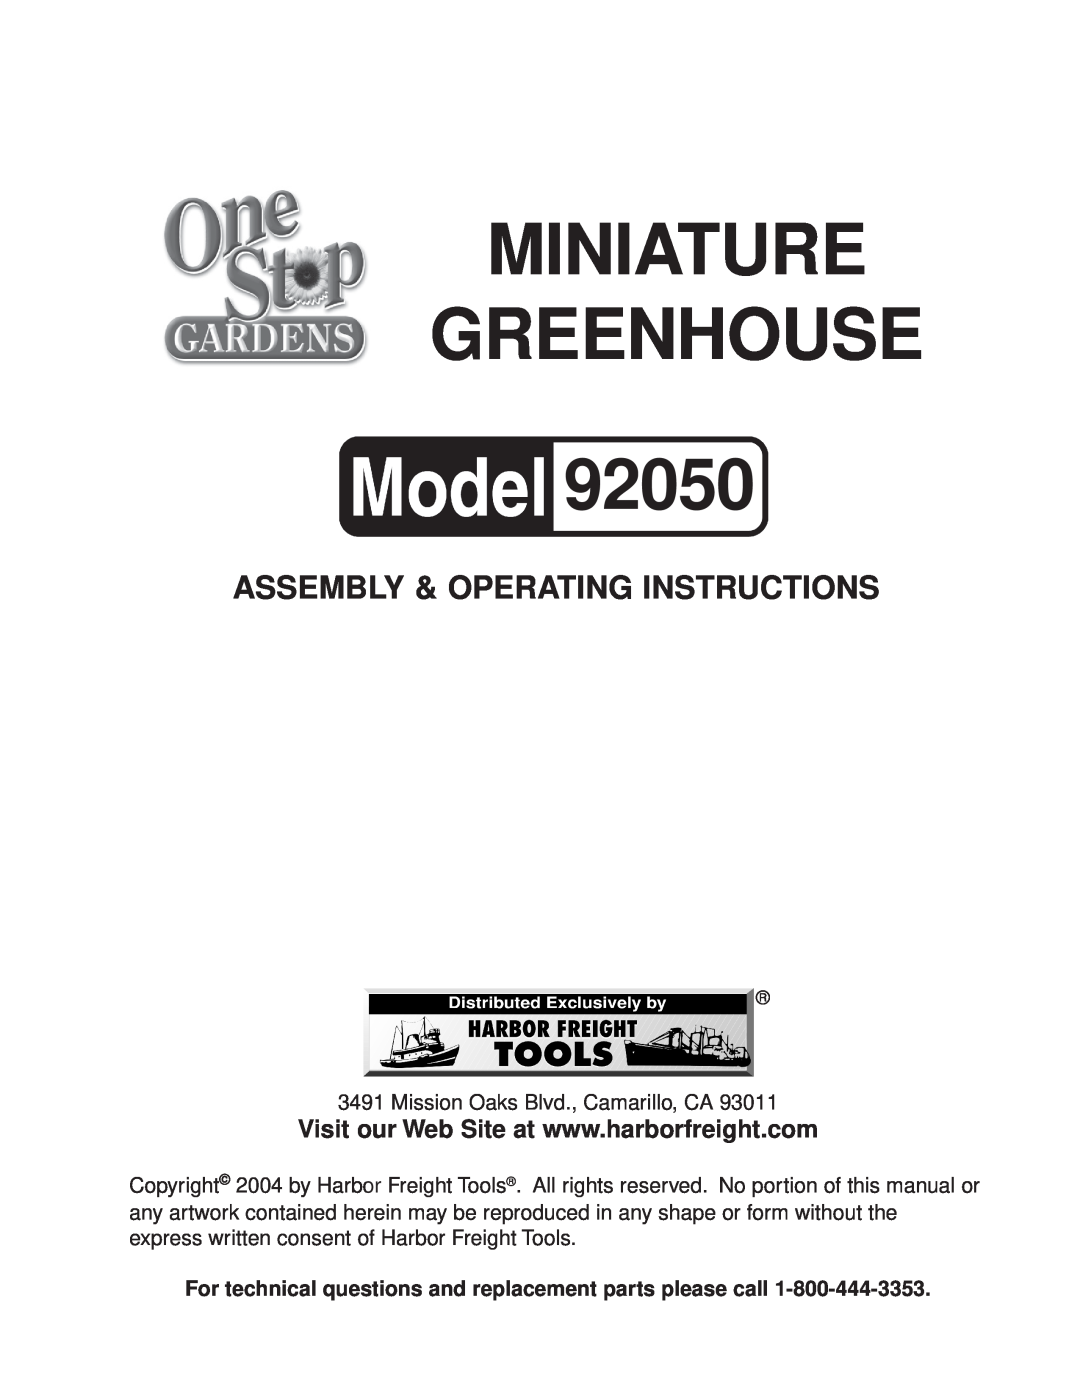 Harbor Freight Tools 92050 operating instructions Miniature Greenhouse, Assembly & Operating Instructions 